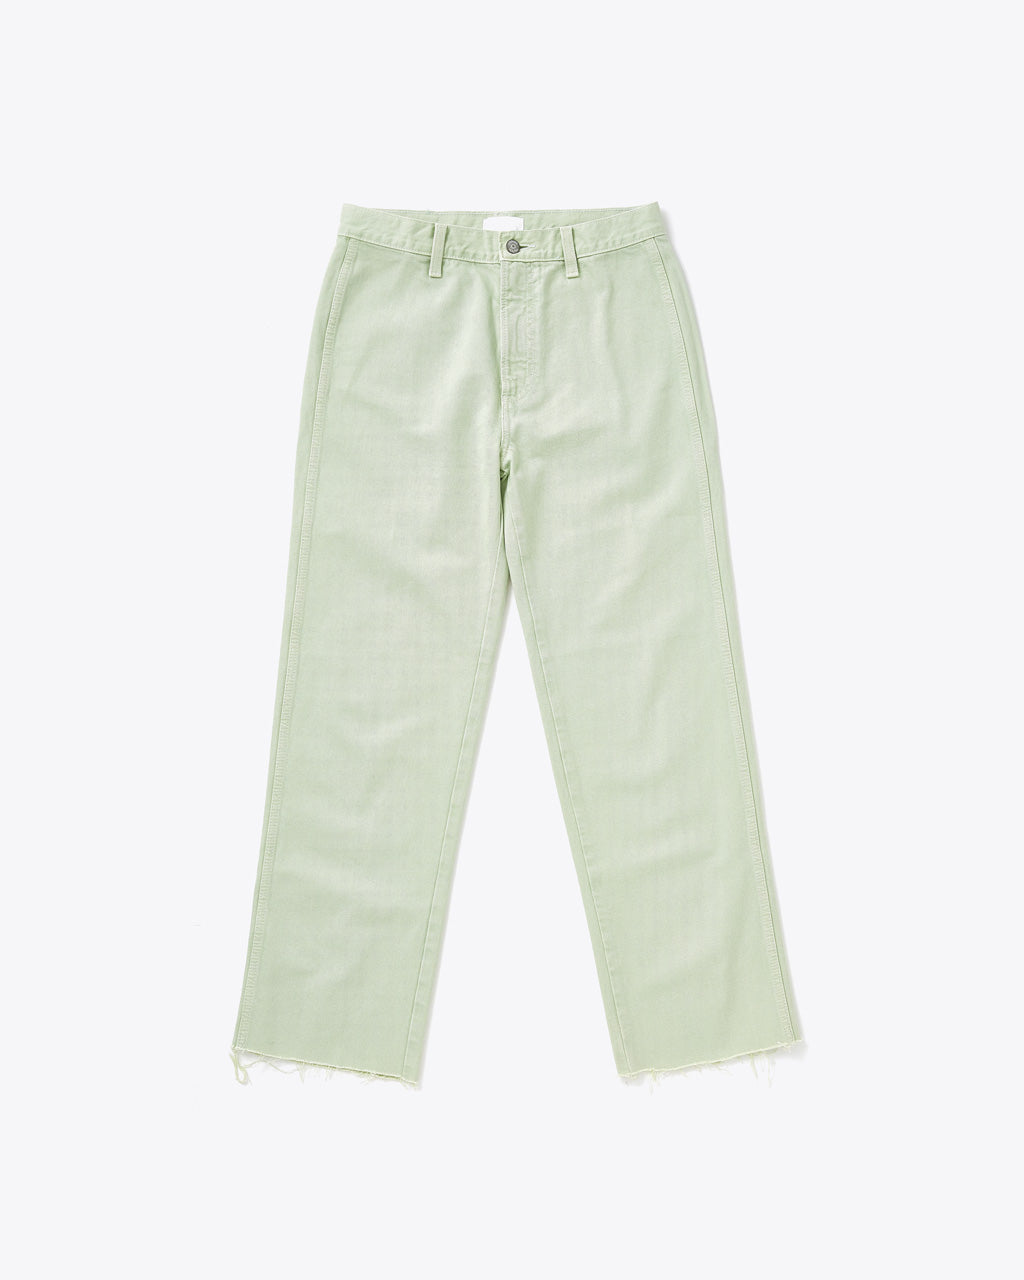 pale green jeans